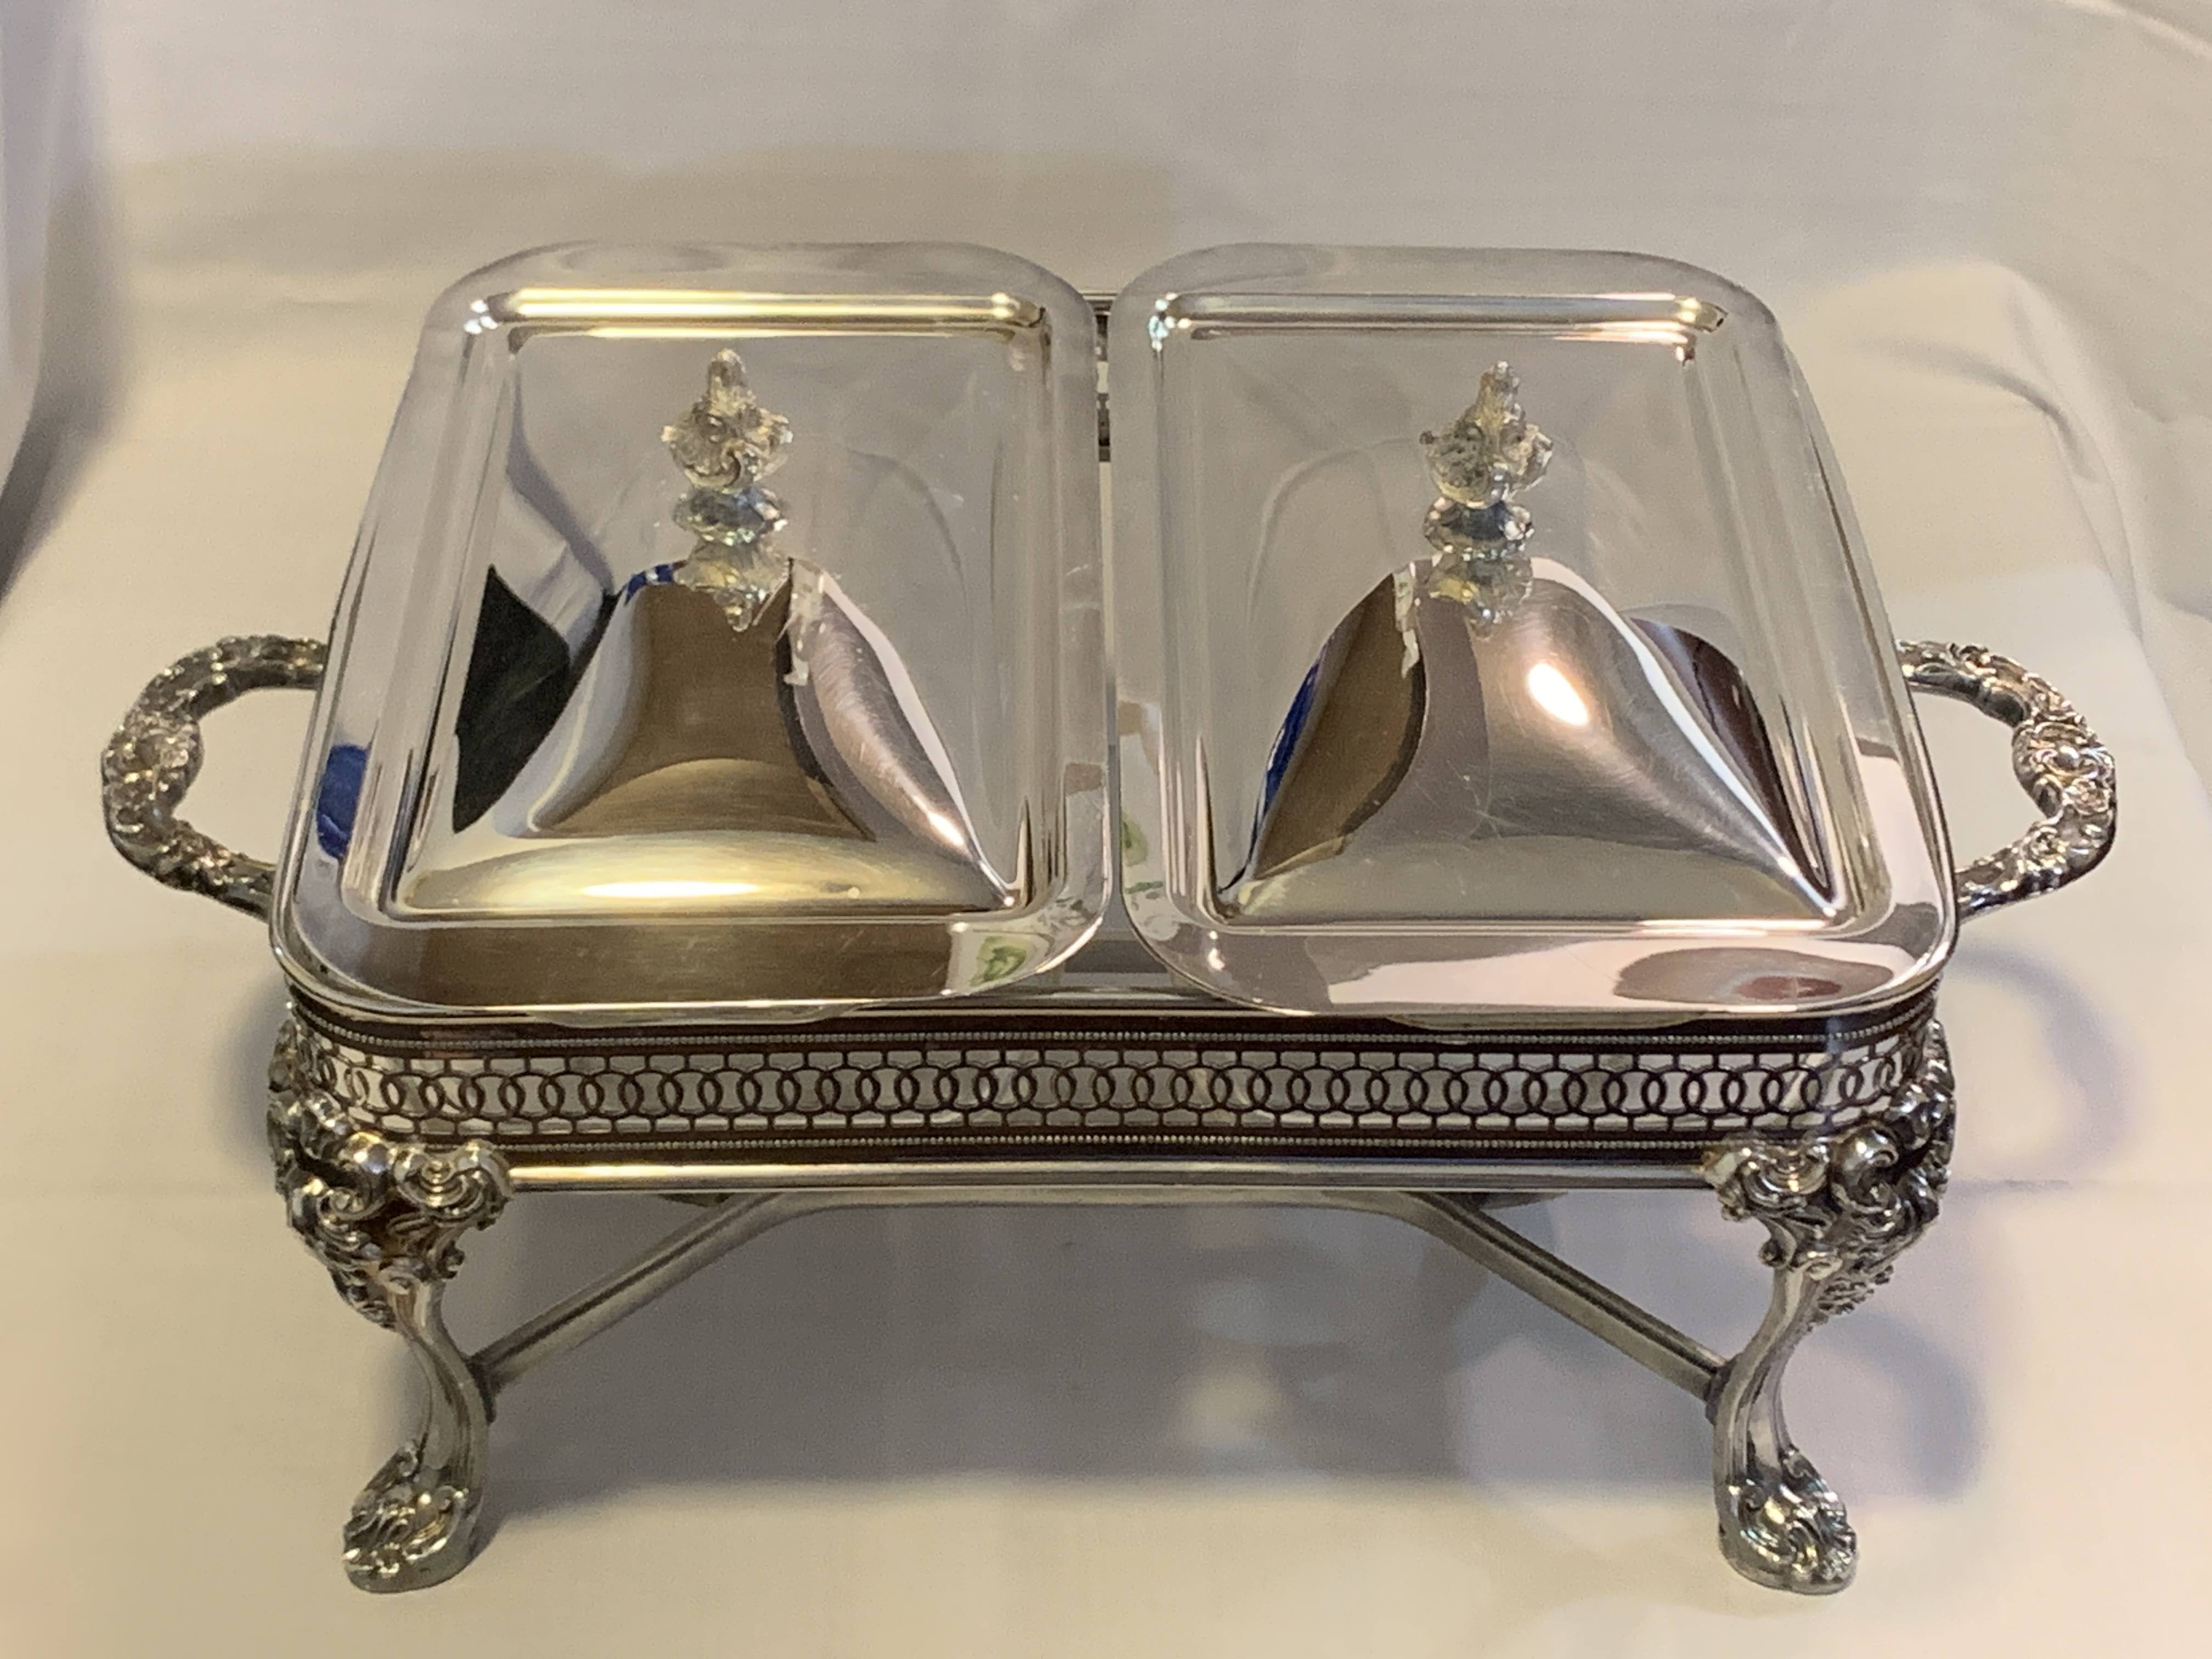 Silver Plated Mid Century - Serving Dish and Lids - With Glass Casseroles